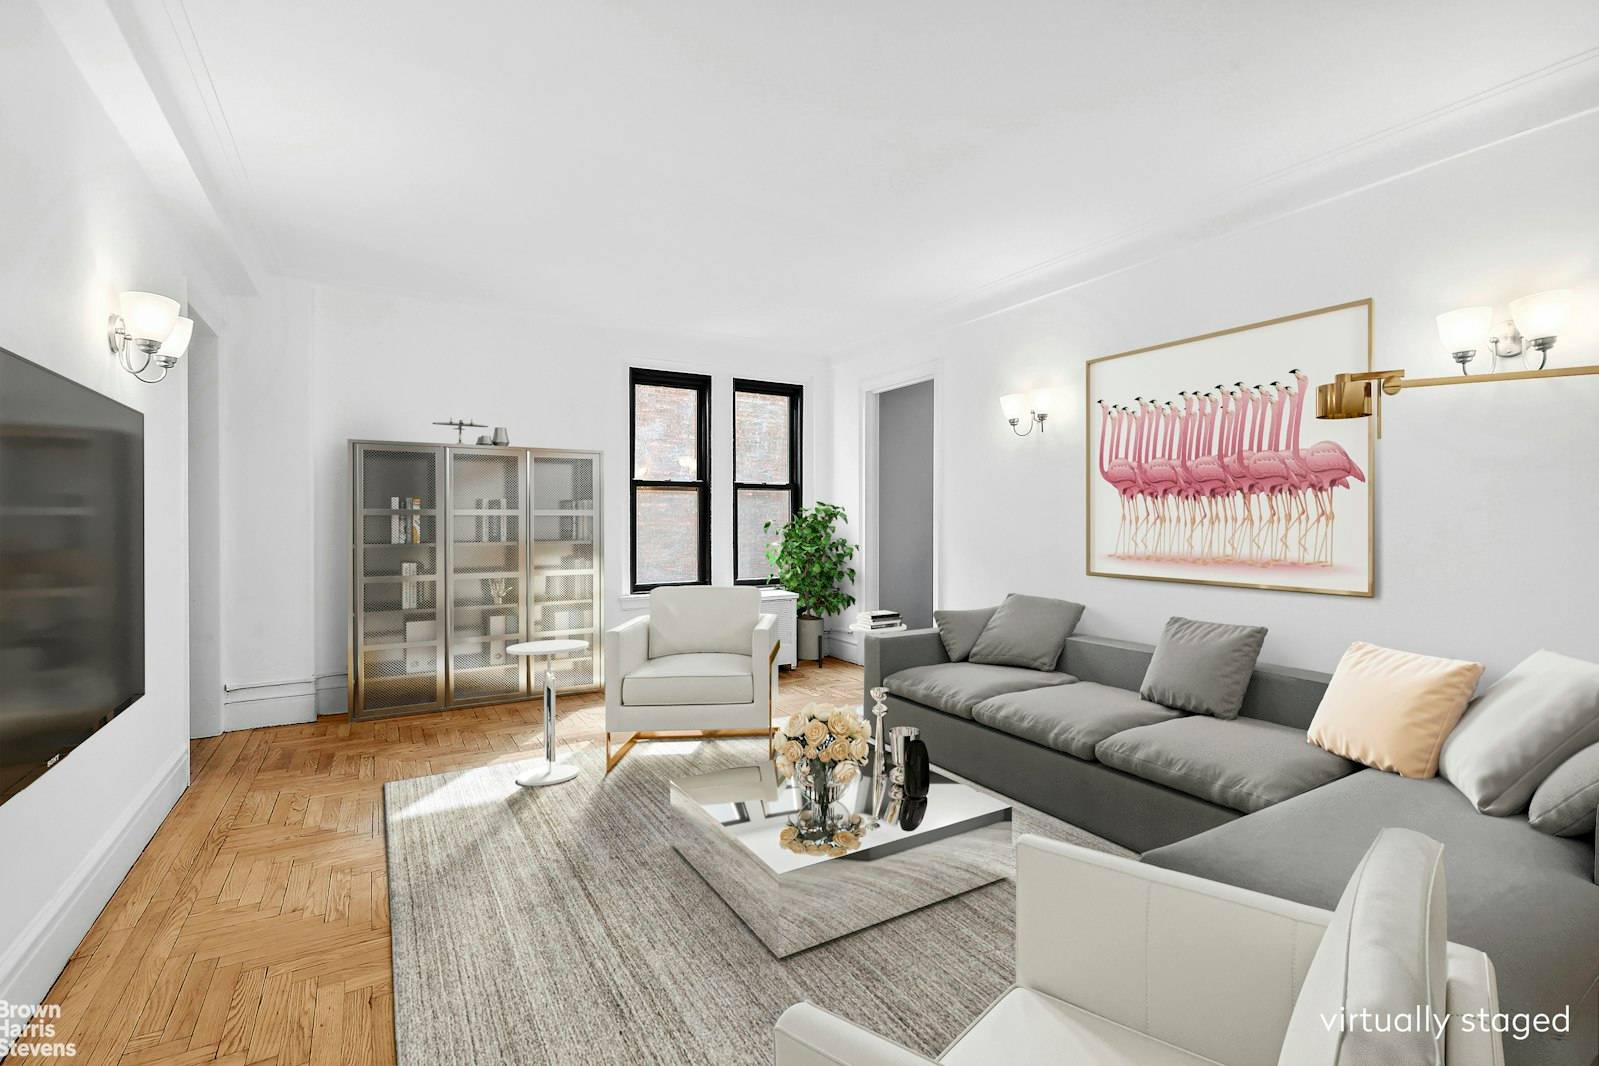 Living is easy in this prime Upper West Side location, with a wonderful layout, priced right, and a quick application approval process.